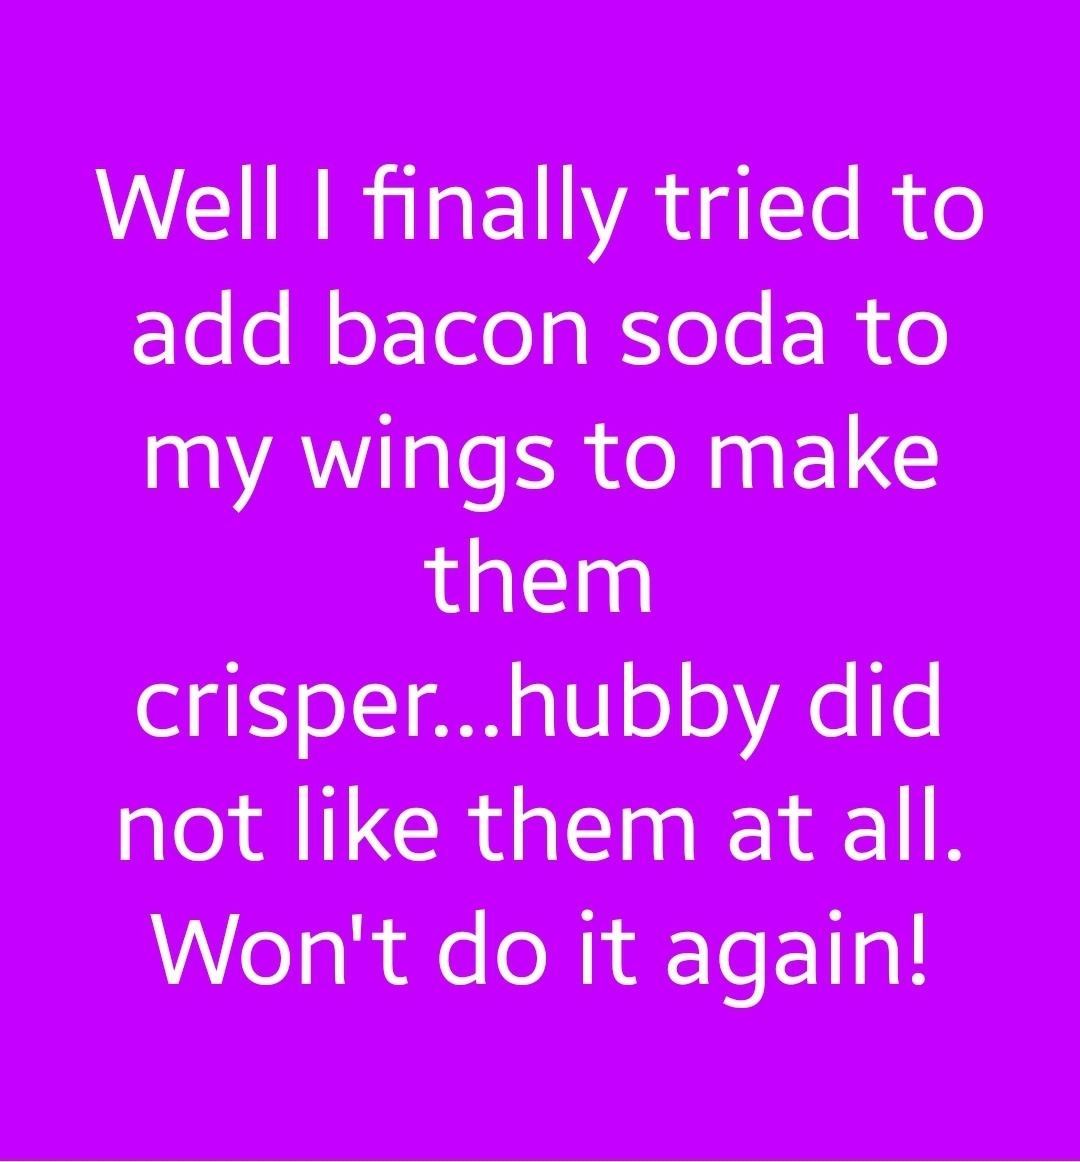 &quot;Well I finally tried to add bacon soda to my wings to make them crisper — hubby did not like them at all; won&#x27;t do it again!&quot;